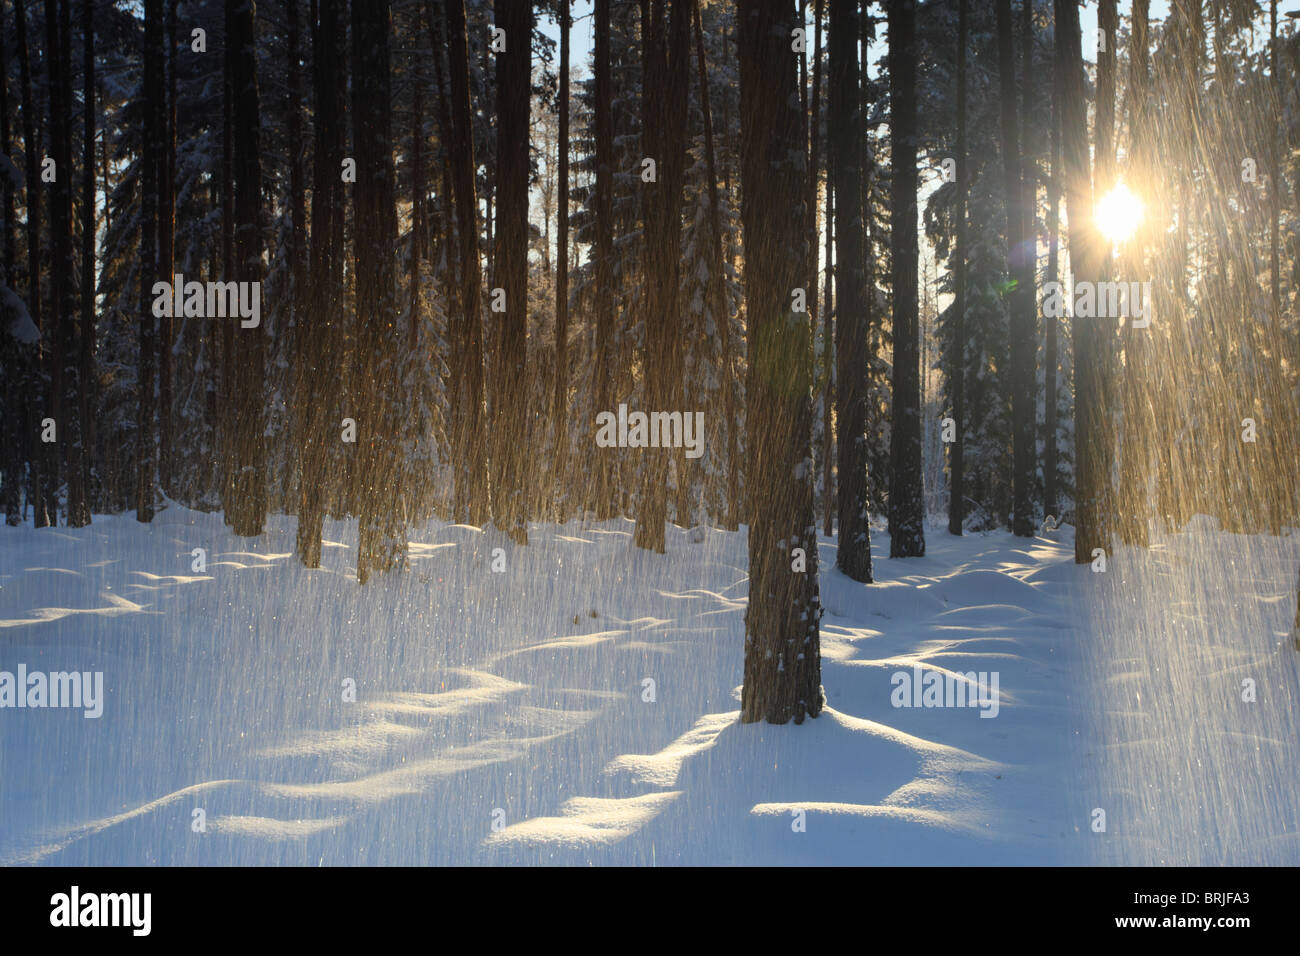 It's raining snow and beams of light falling through a forest onto snow covered ground. Stock Photo